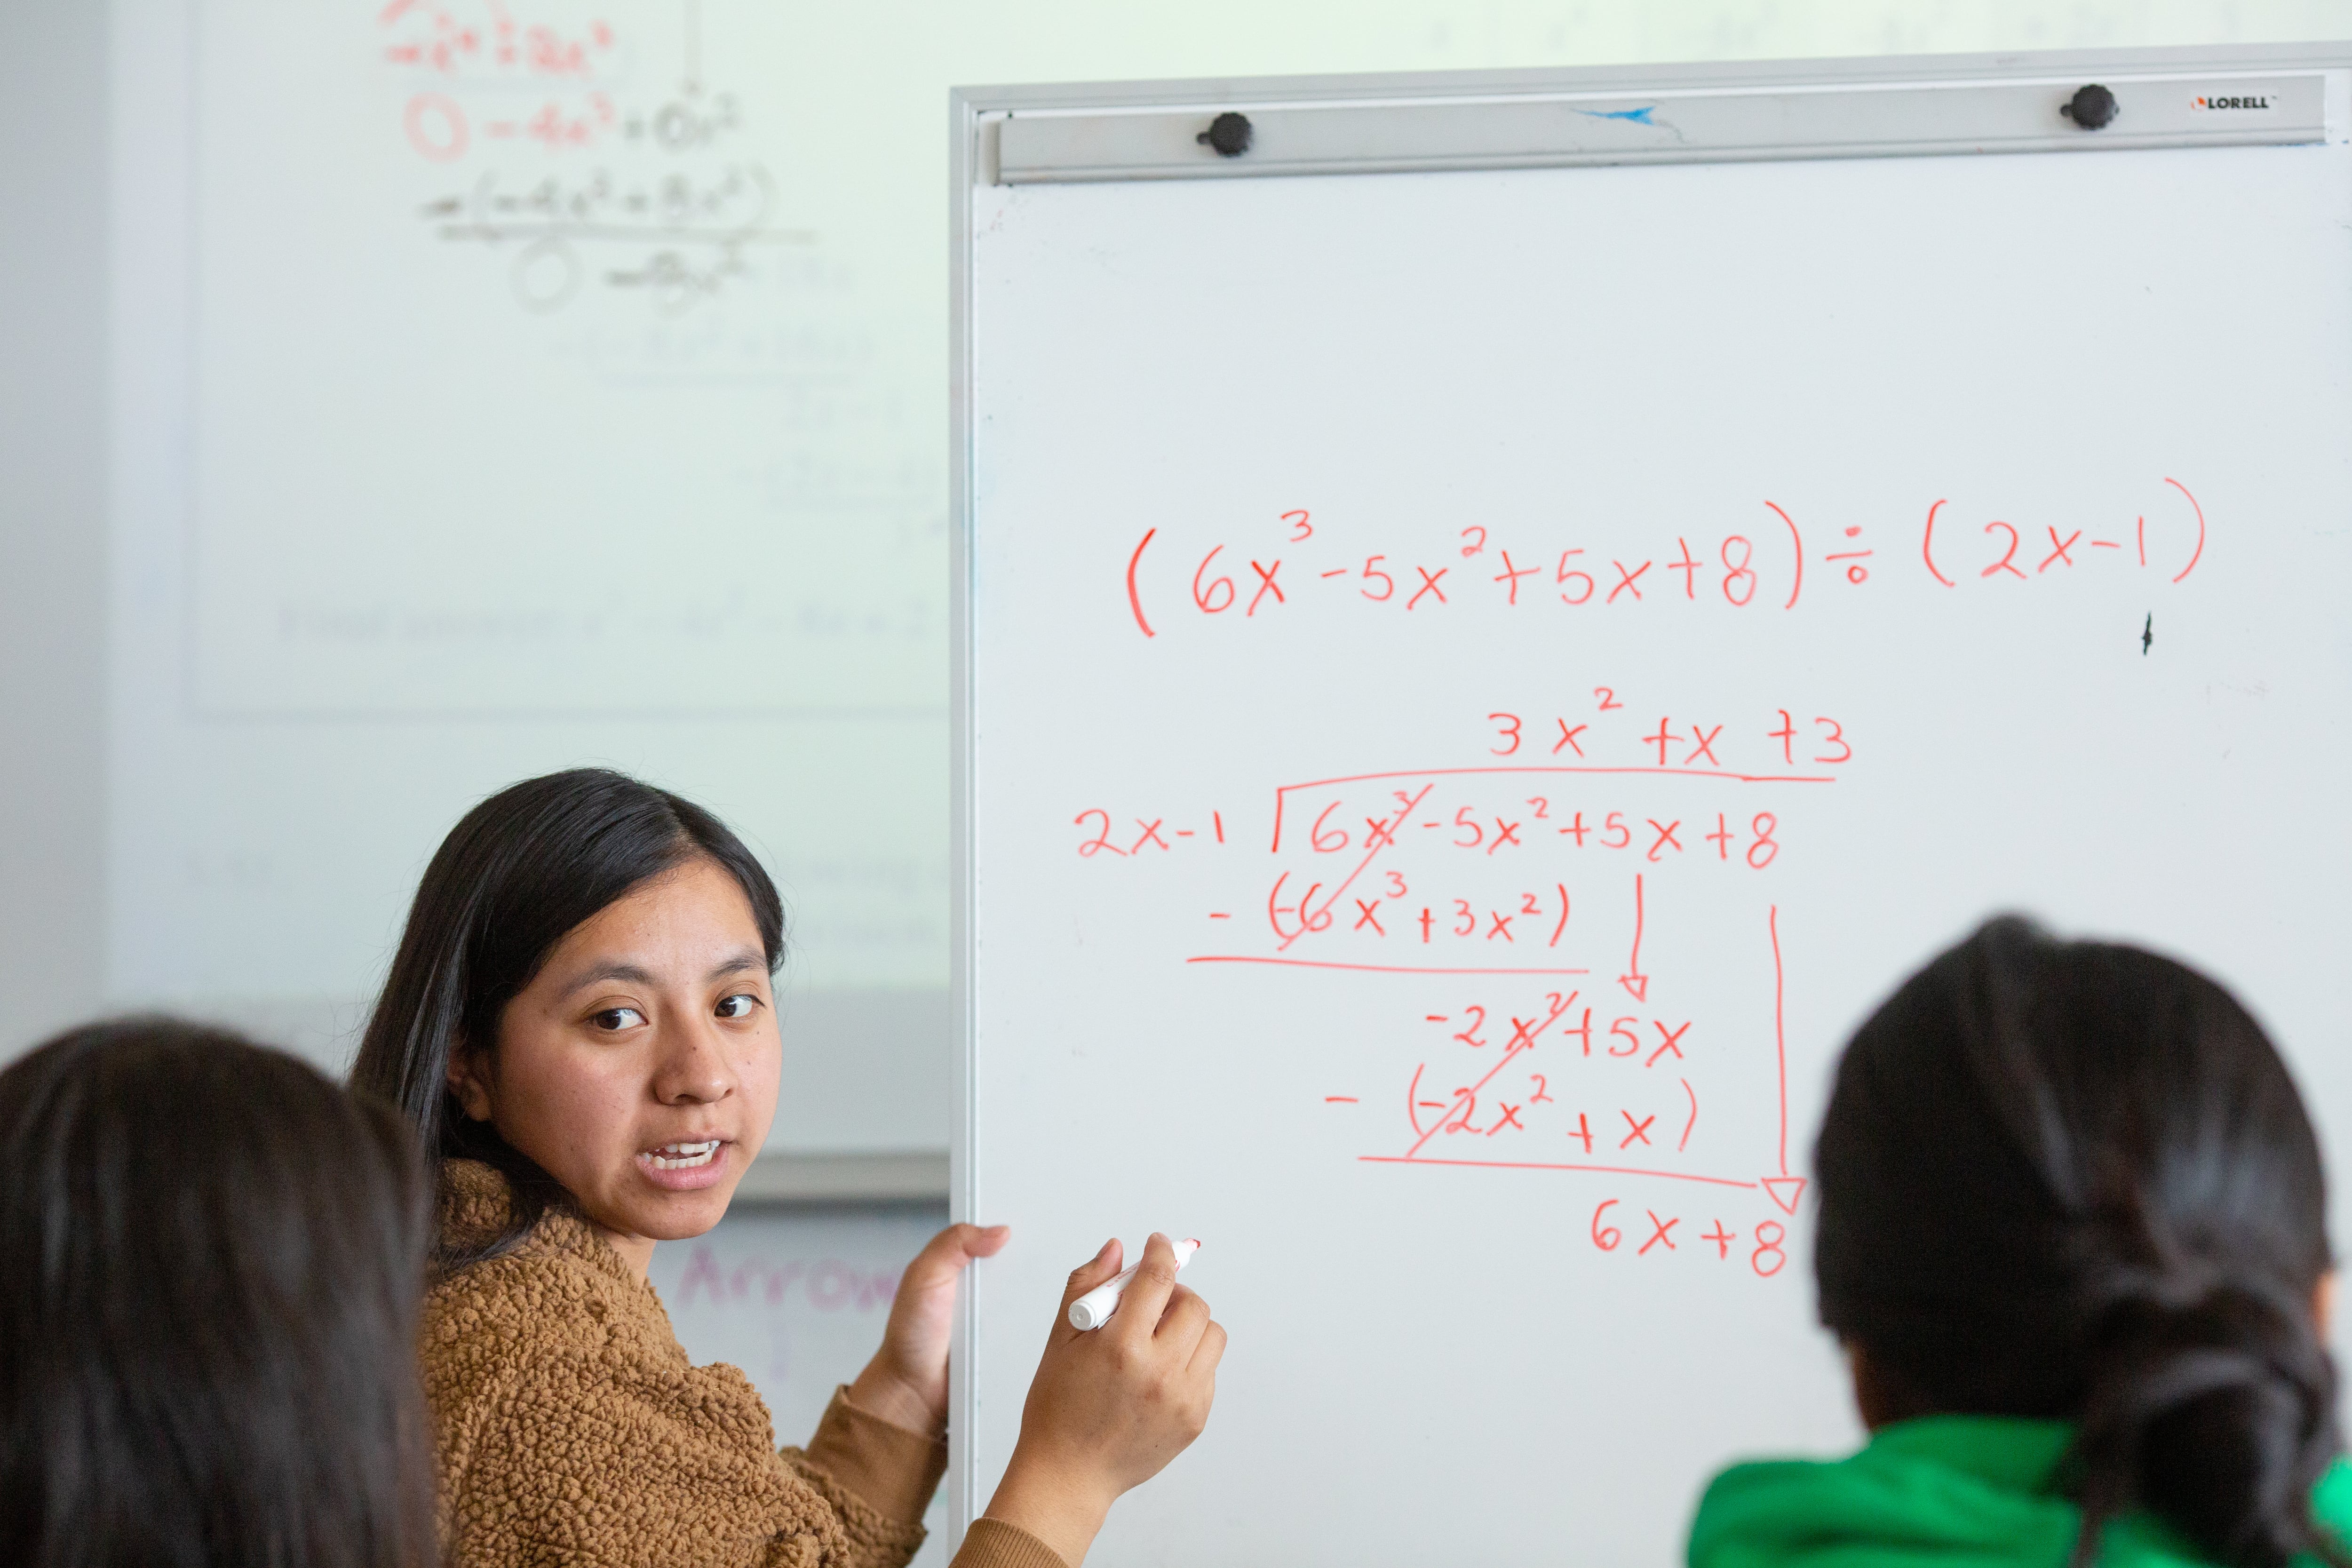 A girl with long brown hair stands at a whiteboard solving an algebra equation. The equation is written in red marker on the board.